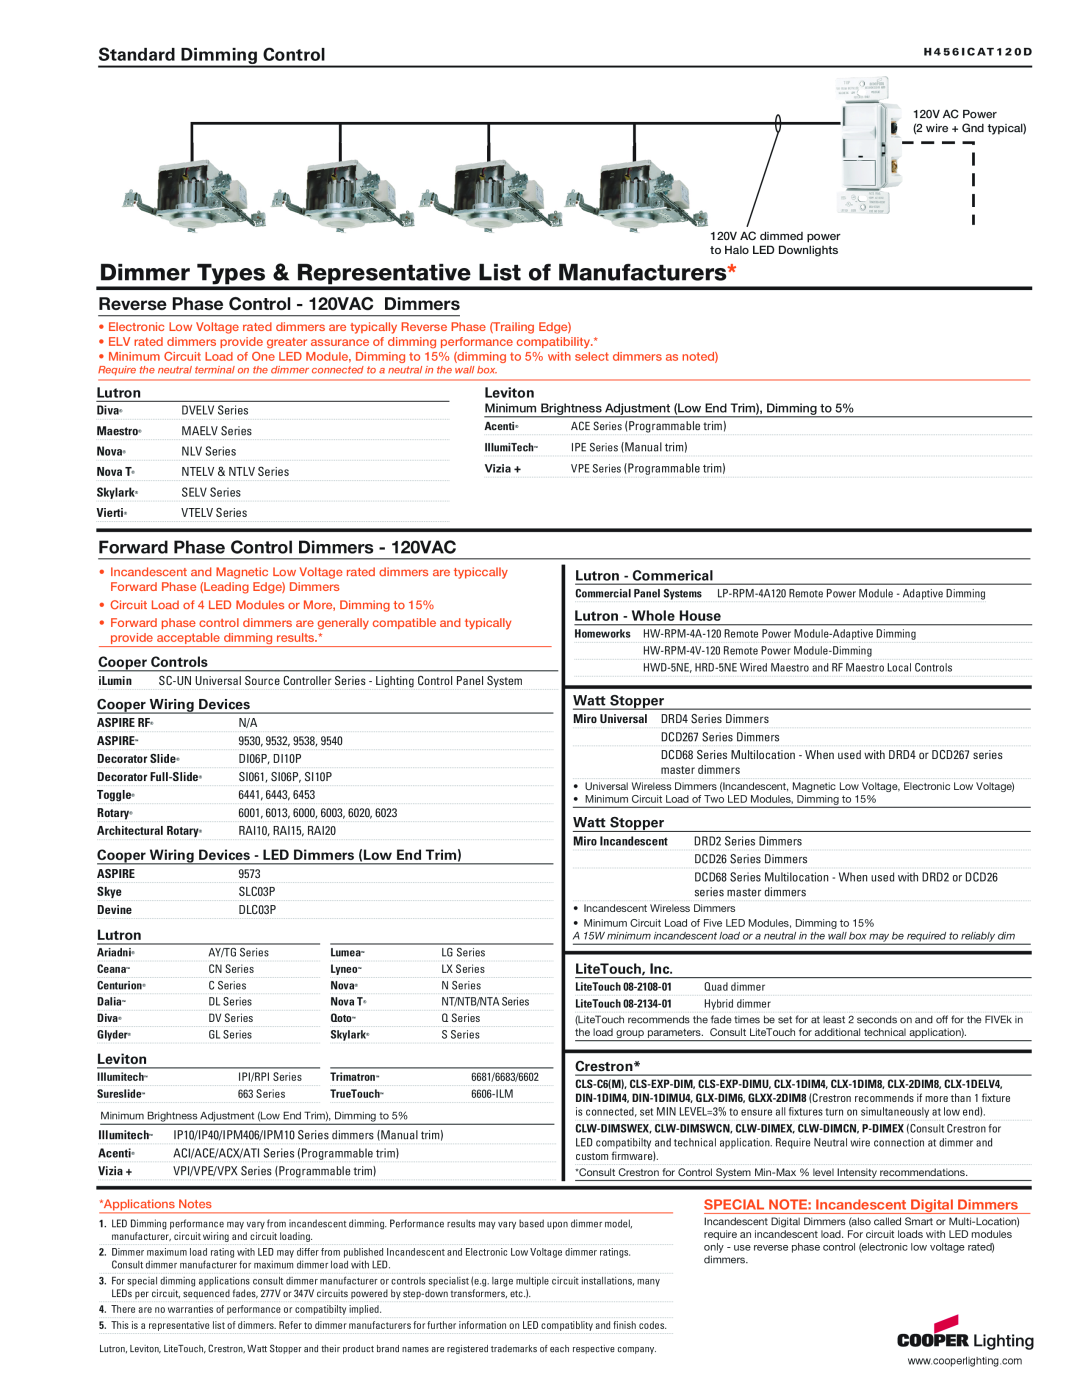 Cooper Lighting H456ICAT120D specifications Dimmer Types & Representative List of Manufacturers, Standard Dimming Control 